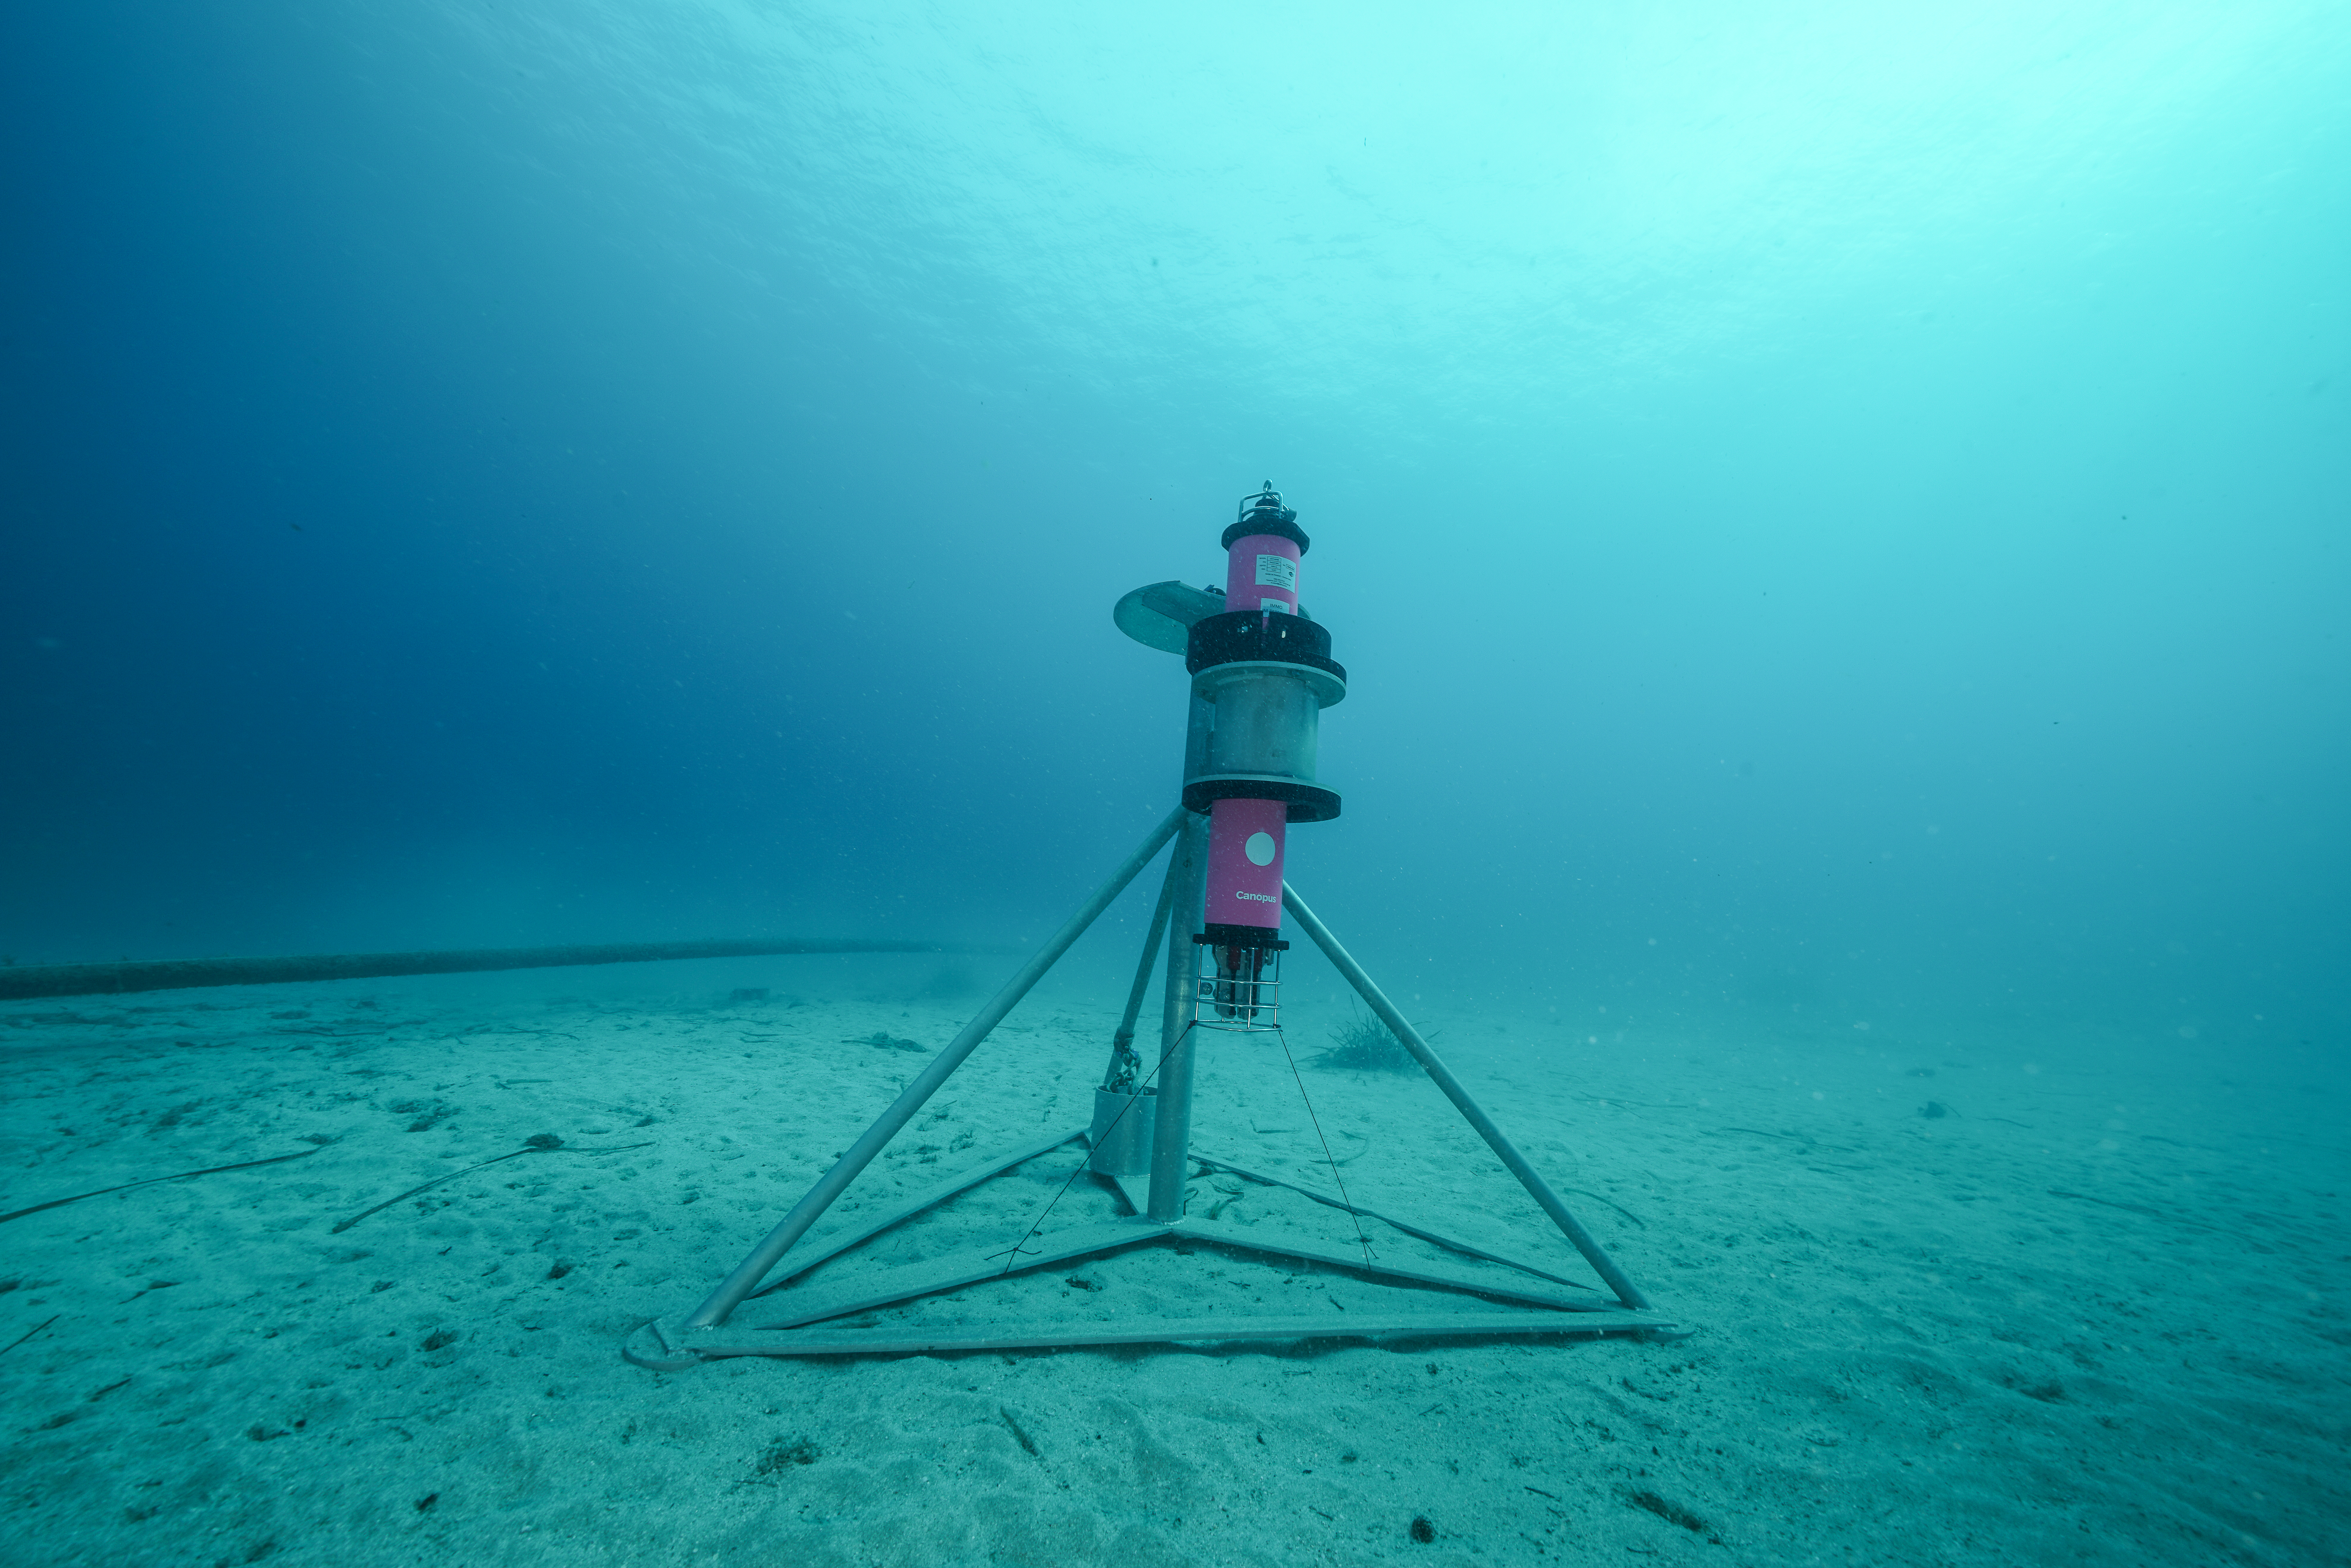 A Canopus transponder is deployed on the seabed